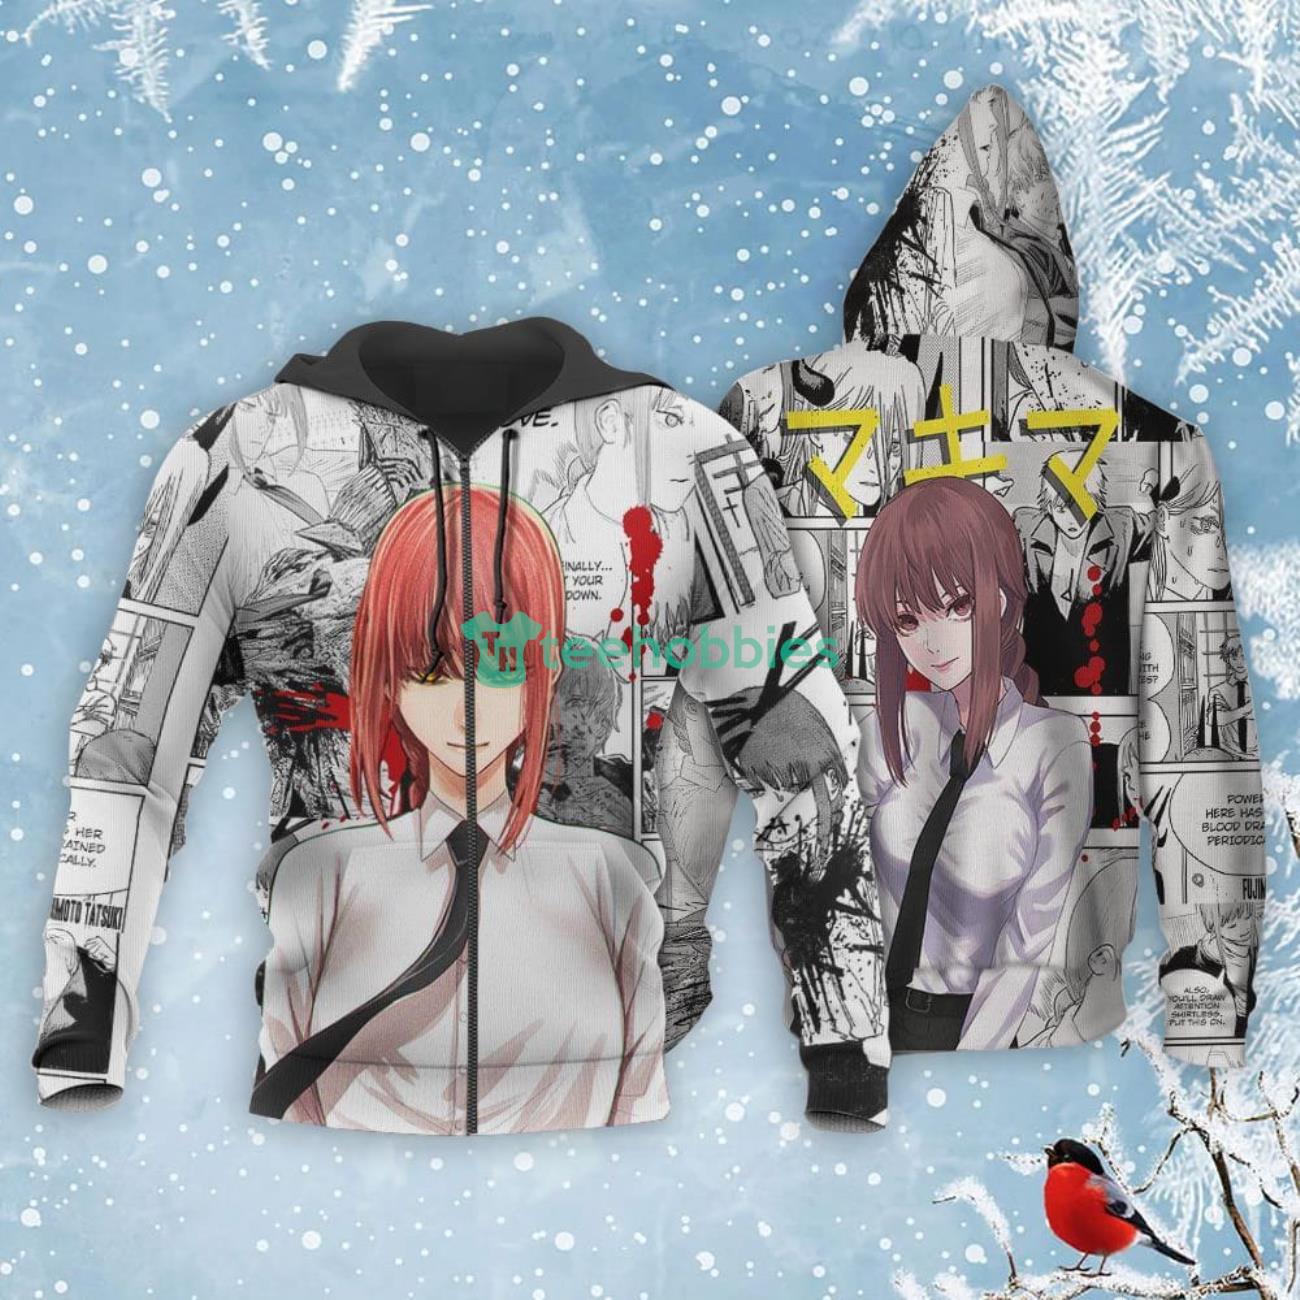 Mikima All Over Printed 3D Shirt Custom Manga Style Chainsaw Man Anime Fans Product Photo 1 Product photo 1